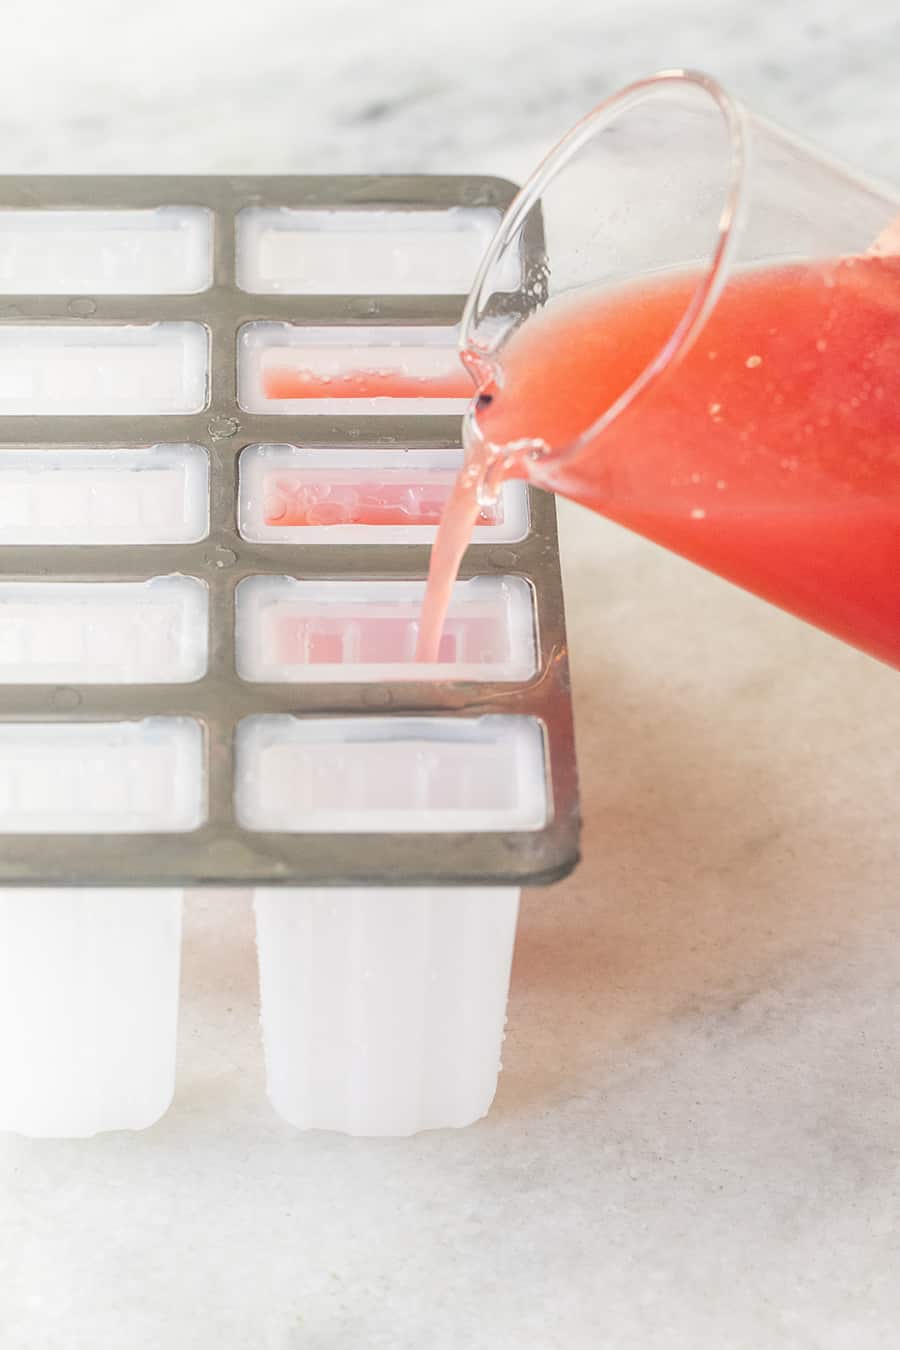 Negroni popsicles poured into a popsicle mold